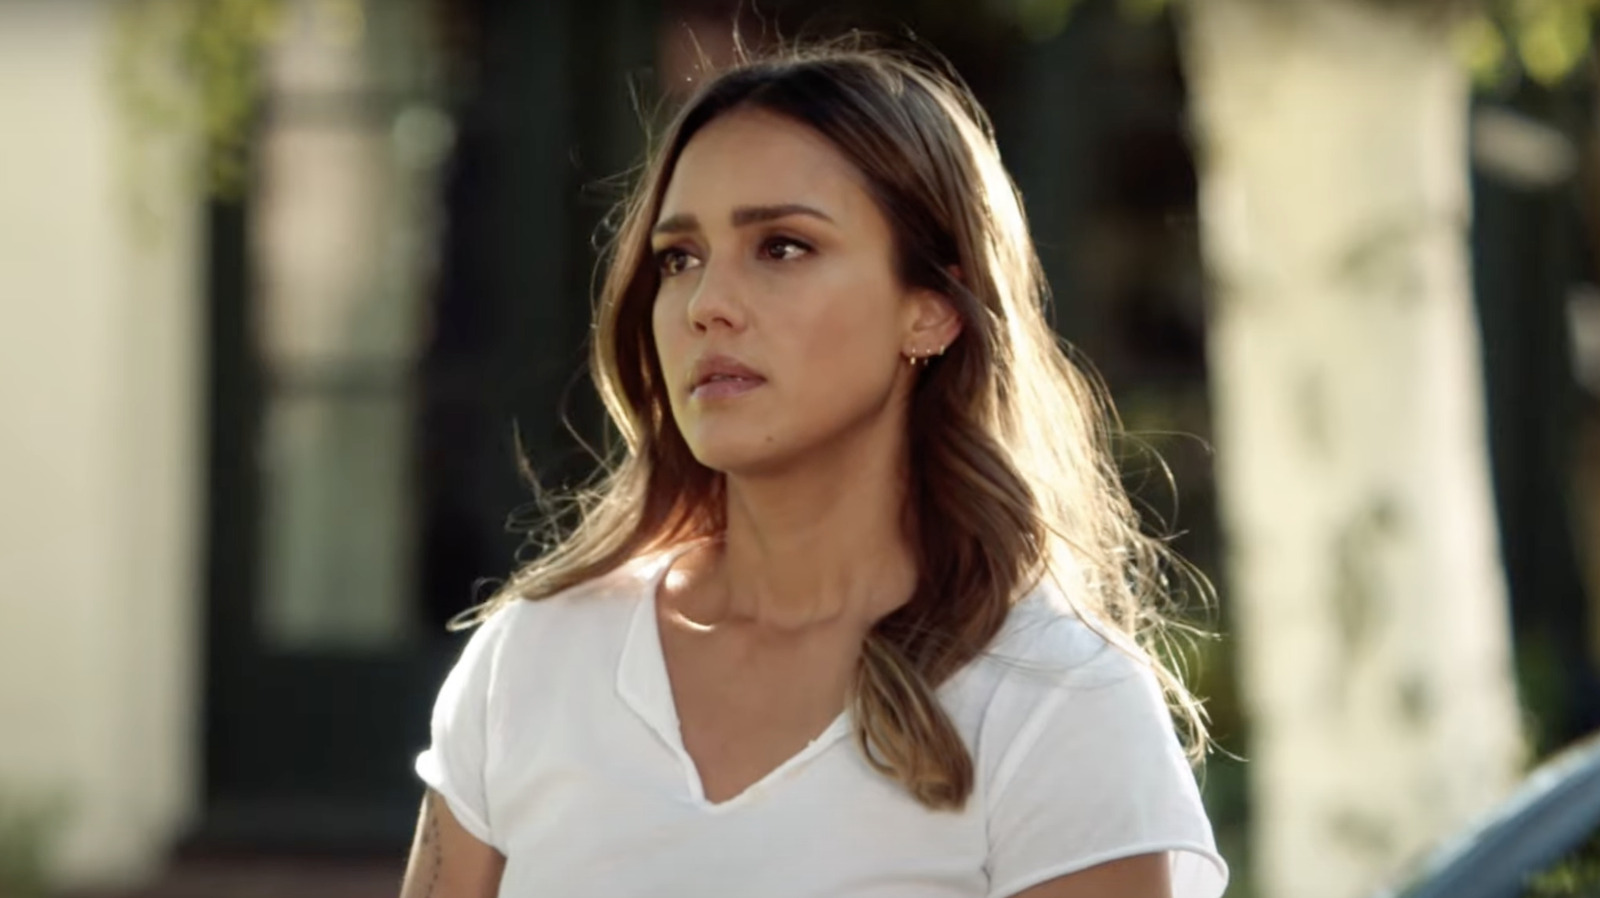 #Jessica Alba To Star In Netflix Series Confessions On The 7:45